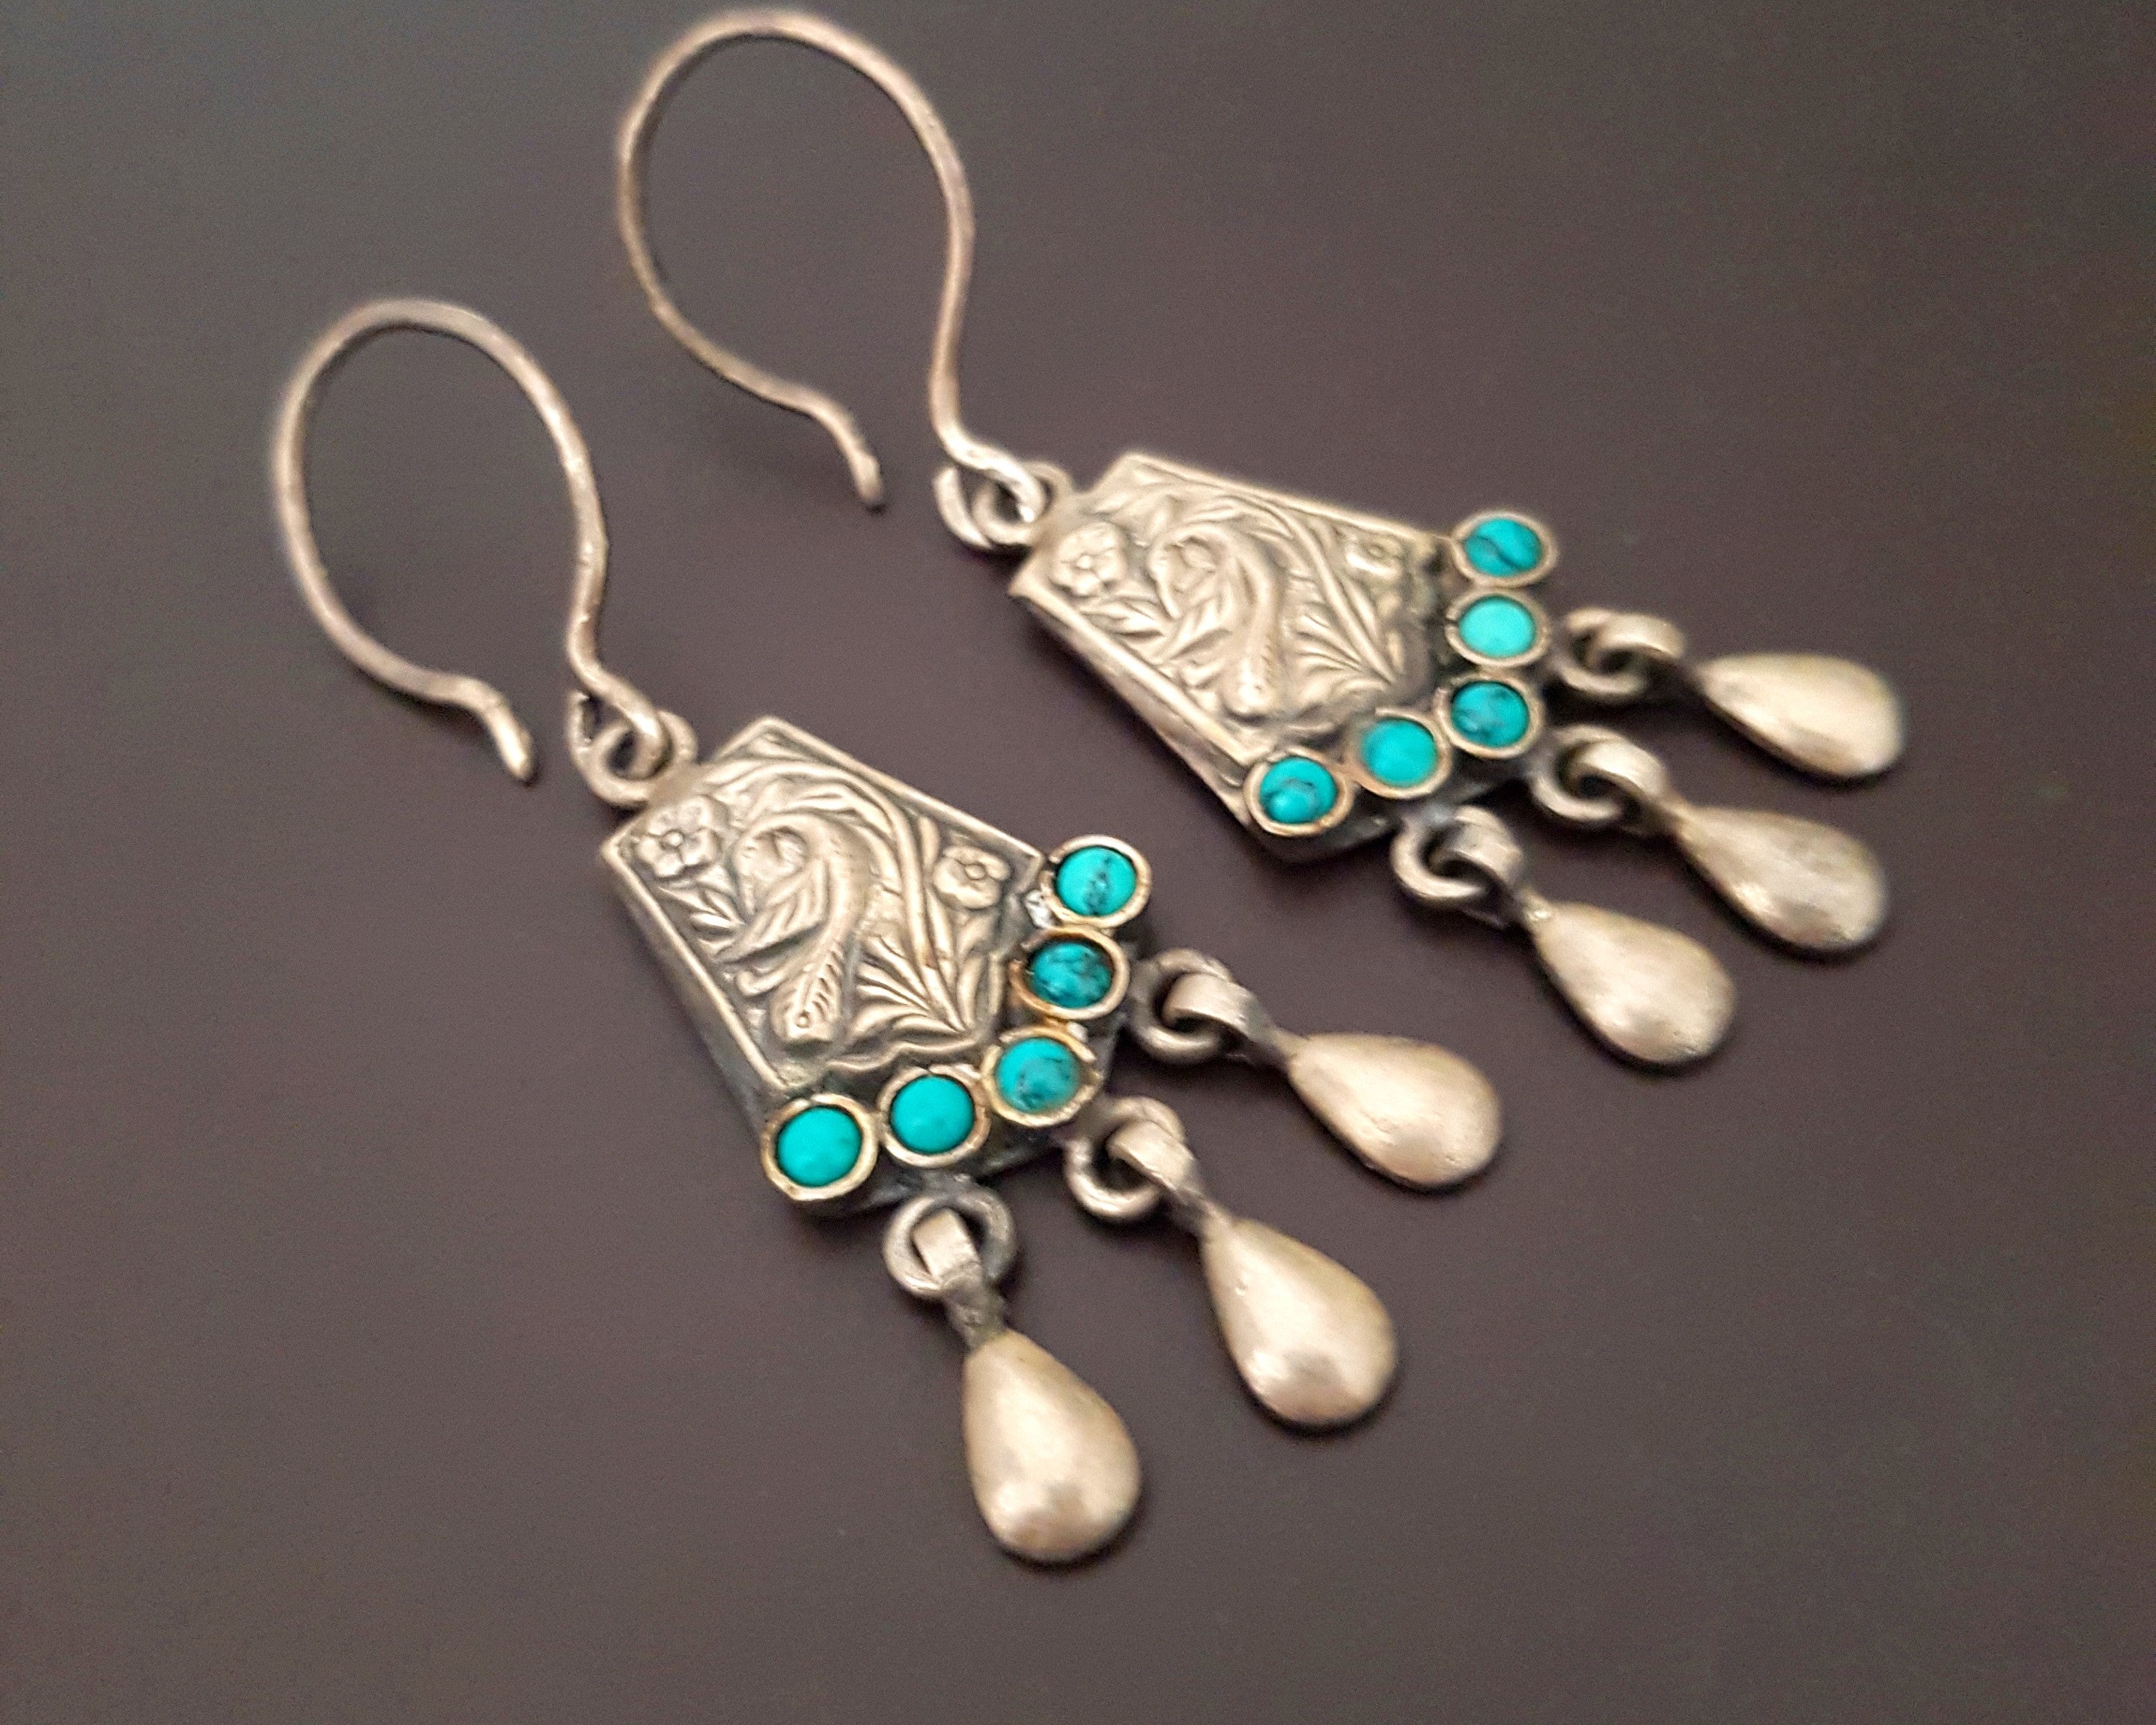 Rajasthani Turquoise Earrings with Dangles